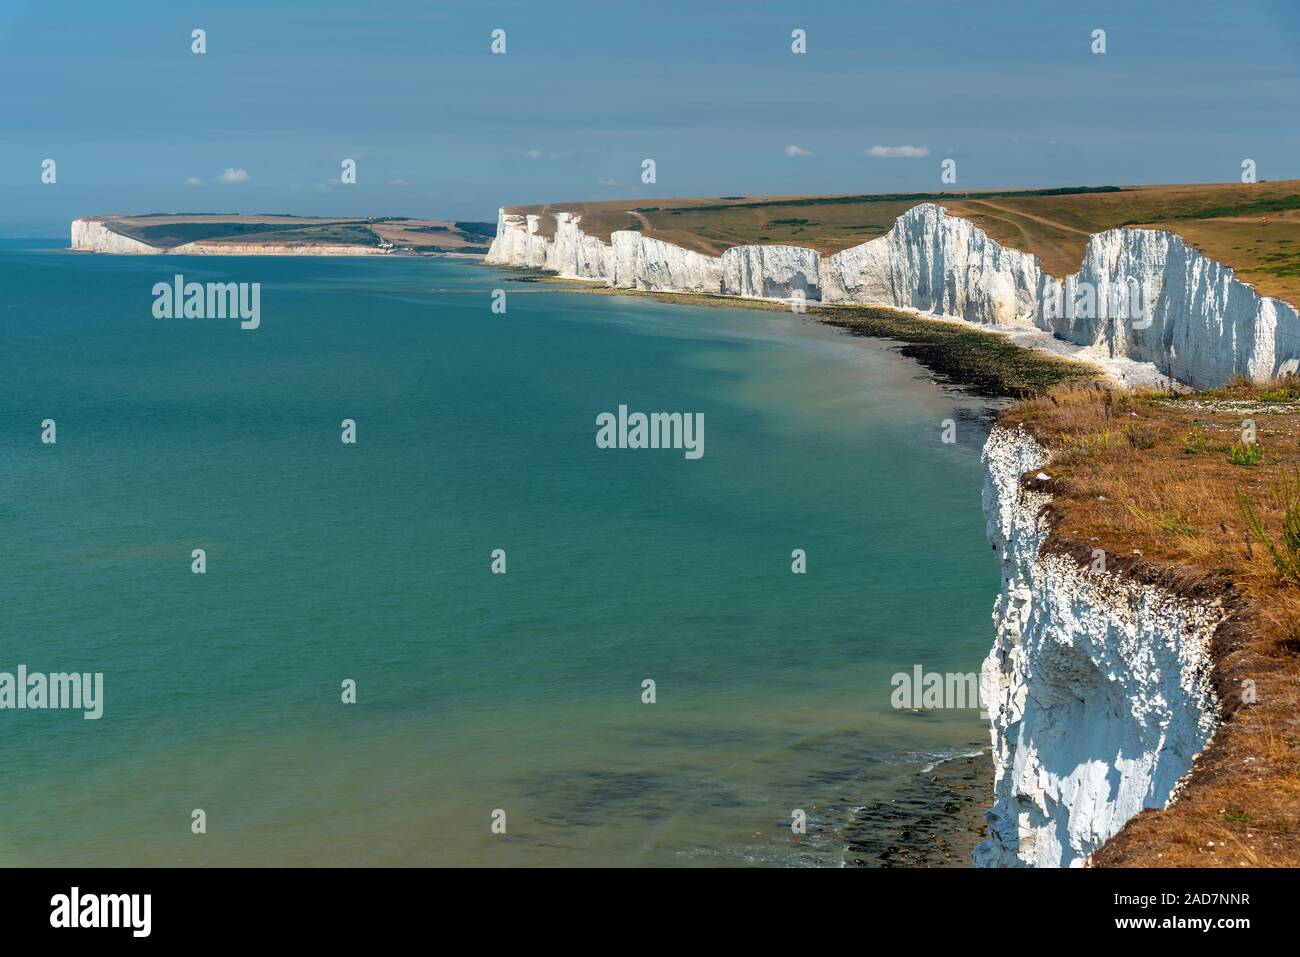 The Seven Sisters chalk cliff at the sout coast of England Stock Photo